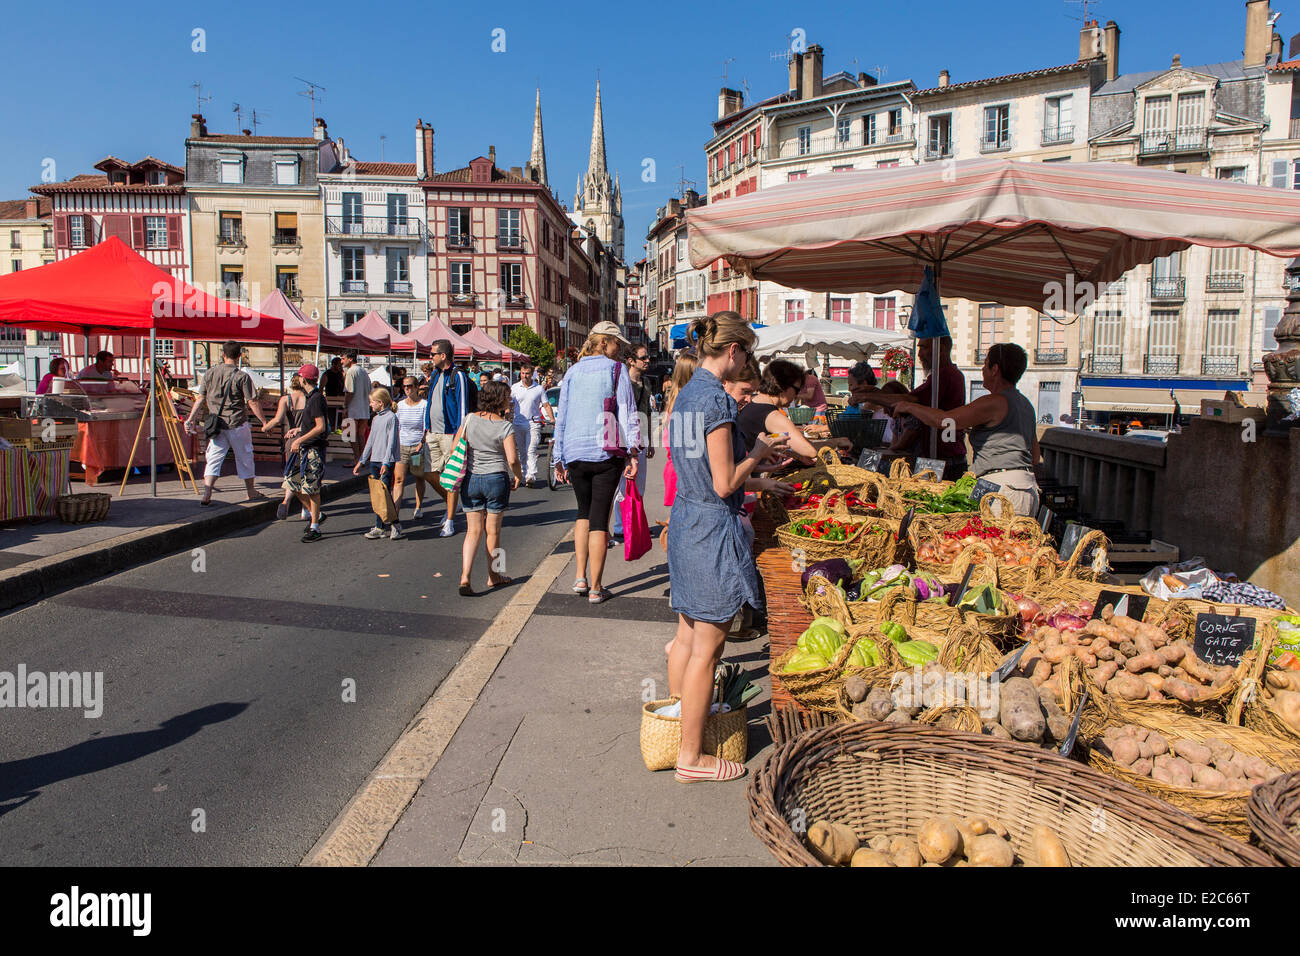 France, Pyrenees Atlantiques, Bayonne, quai Amiral Dubourdieu, market day on the bridge Marengo, traditional architecture on Nive river banks and the arrows of the cathedral Saint Catherine Stock Photo